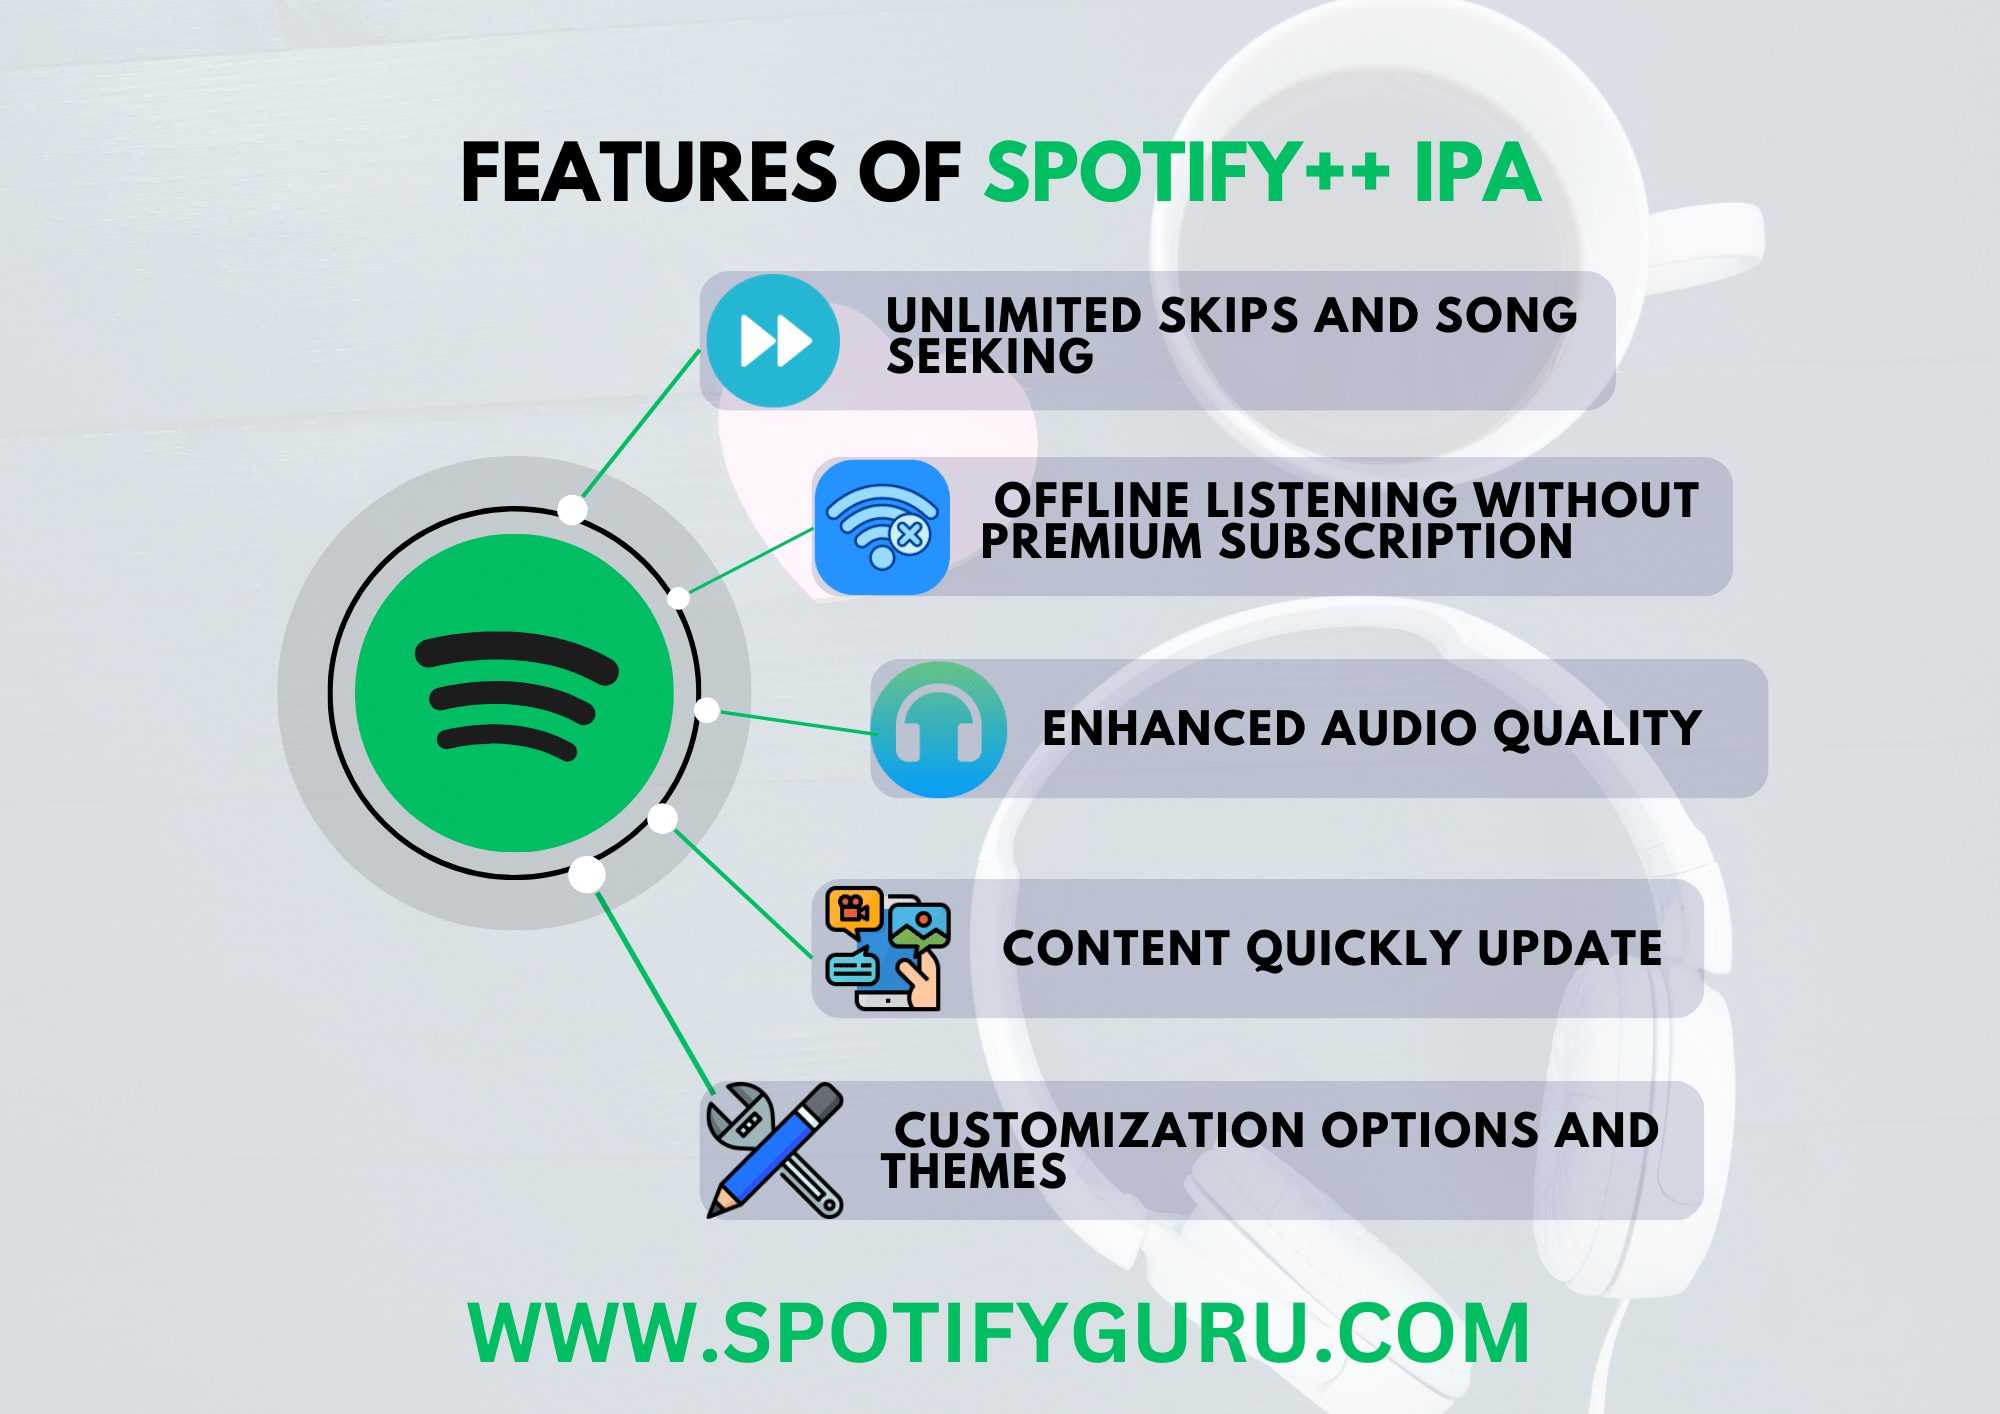 Features of Spotify++ IPA